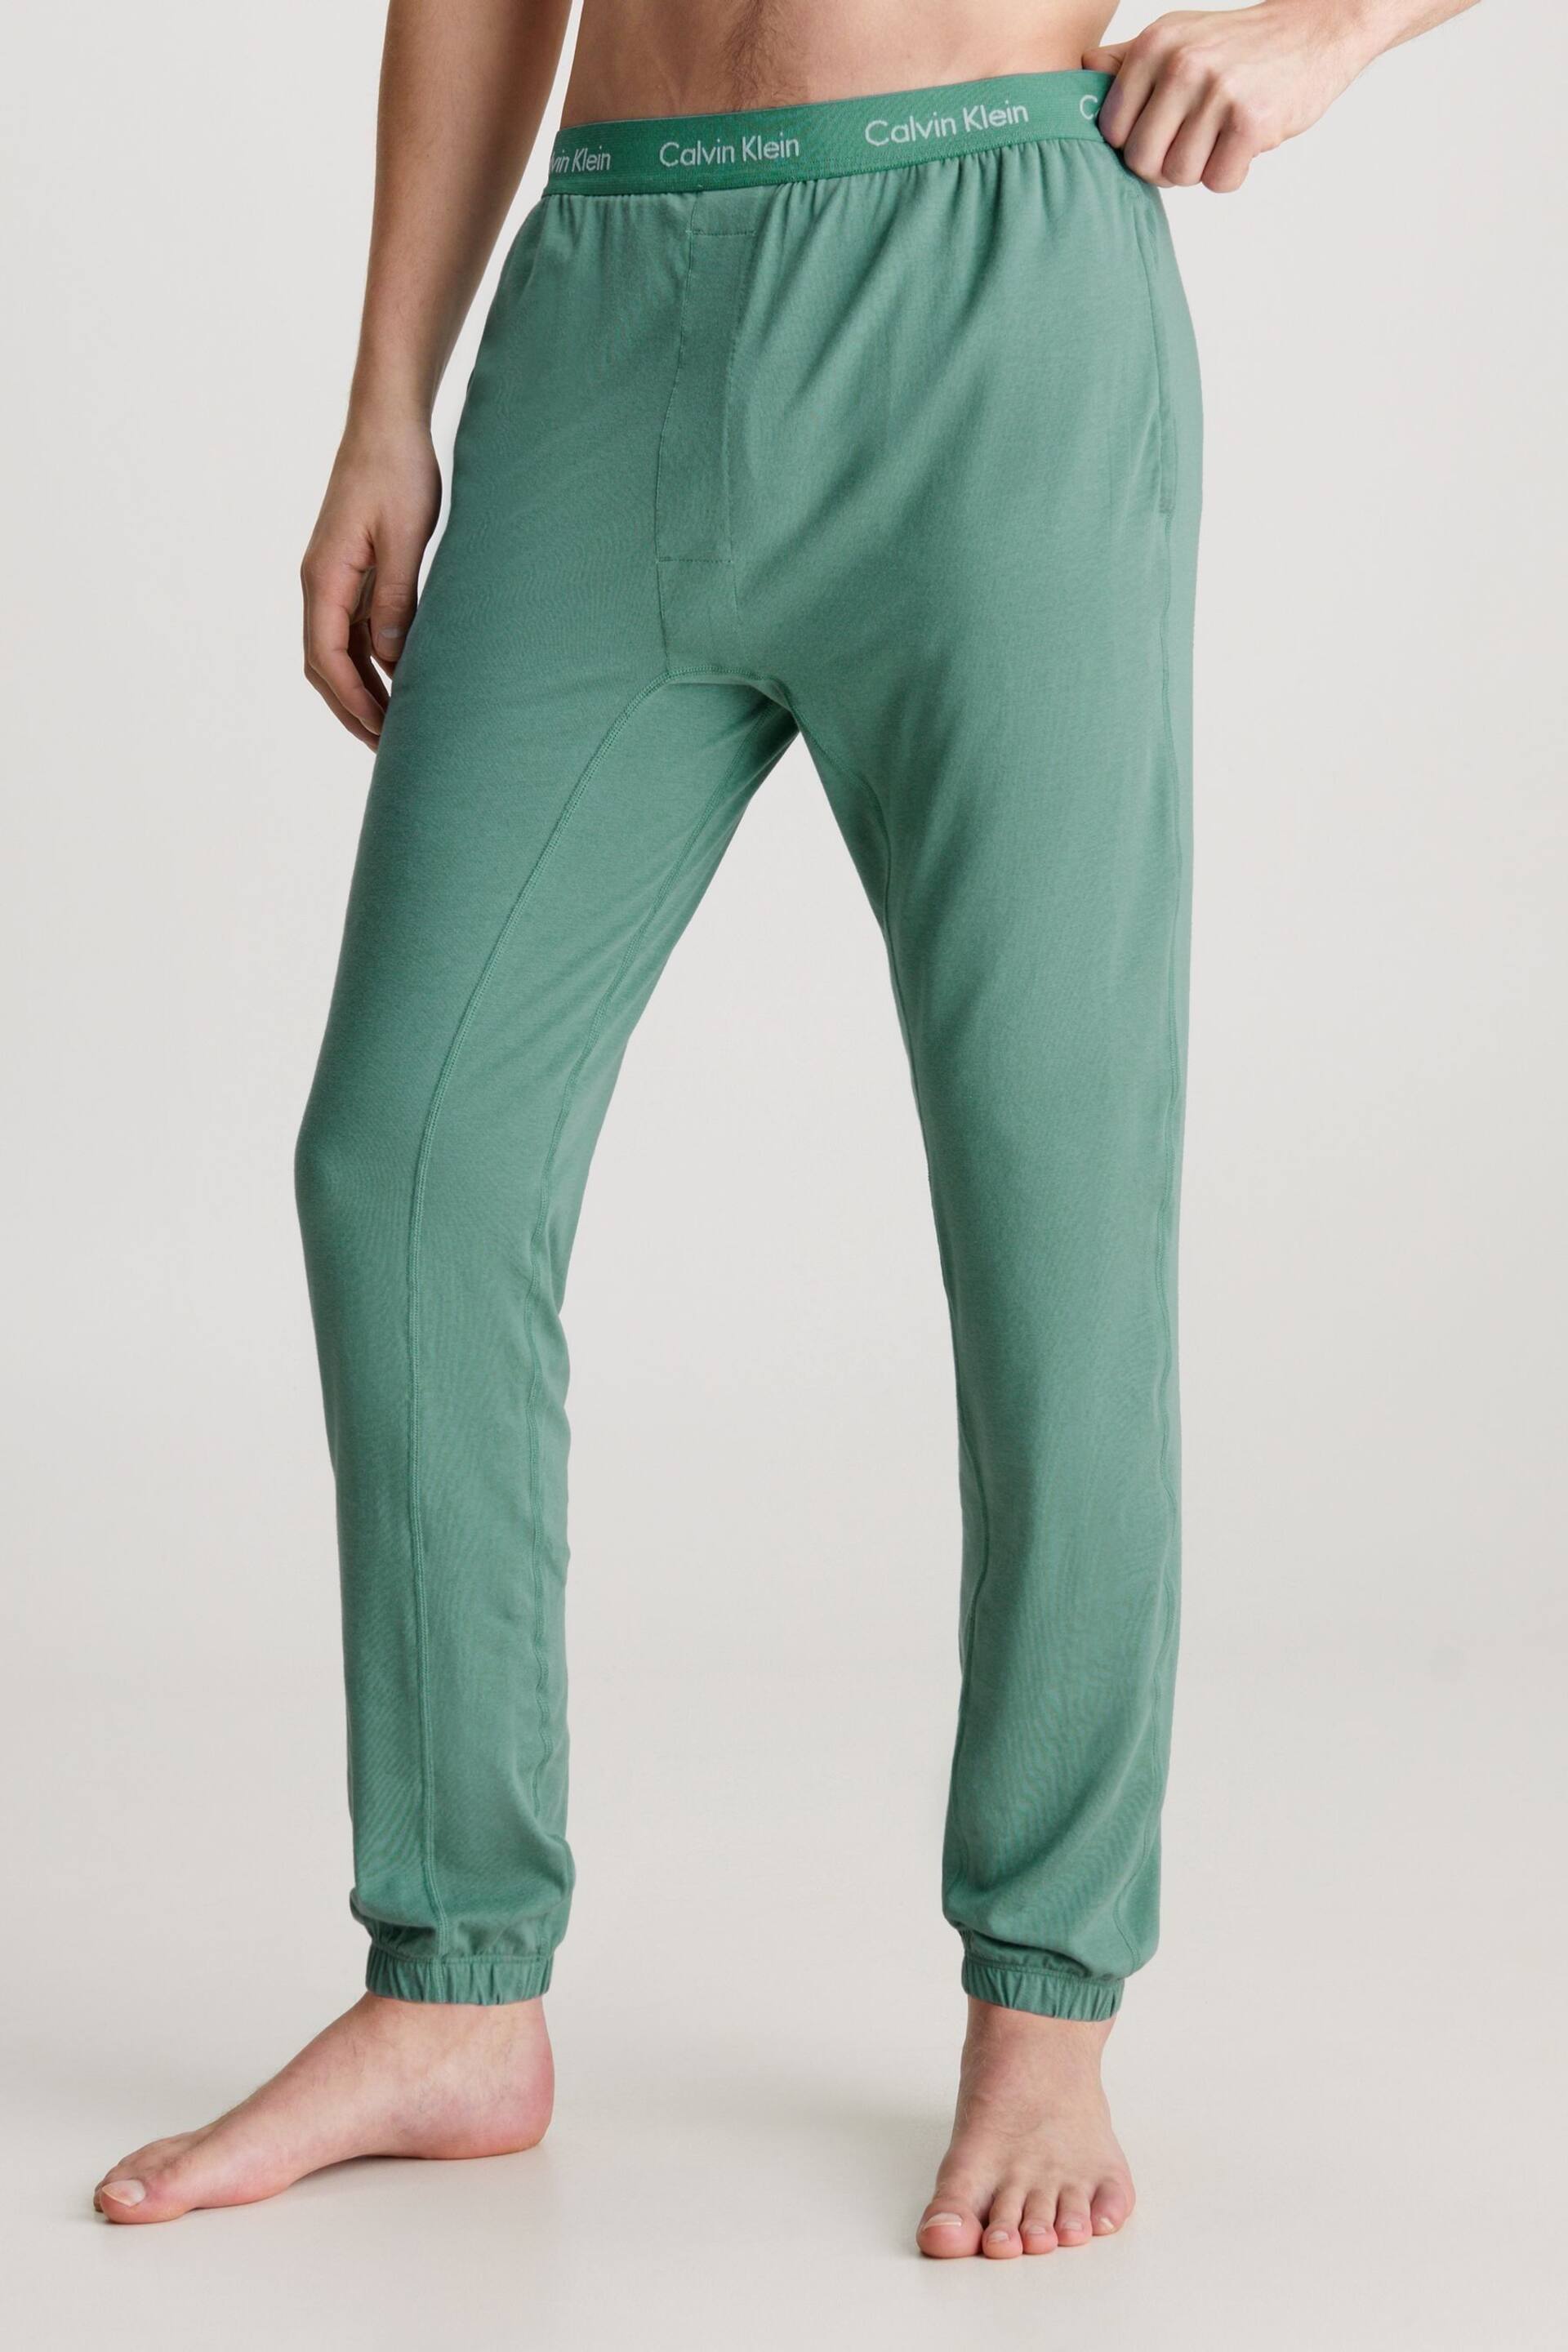 Calvin Klein Green Detailed Waistband Joggers - Image 1 of 4